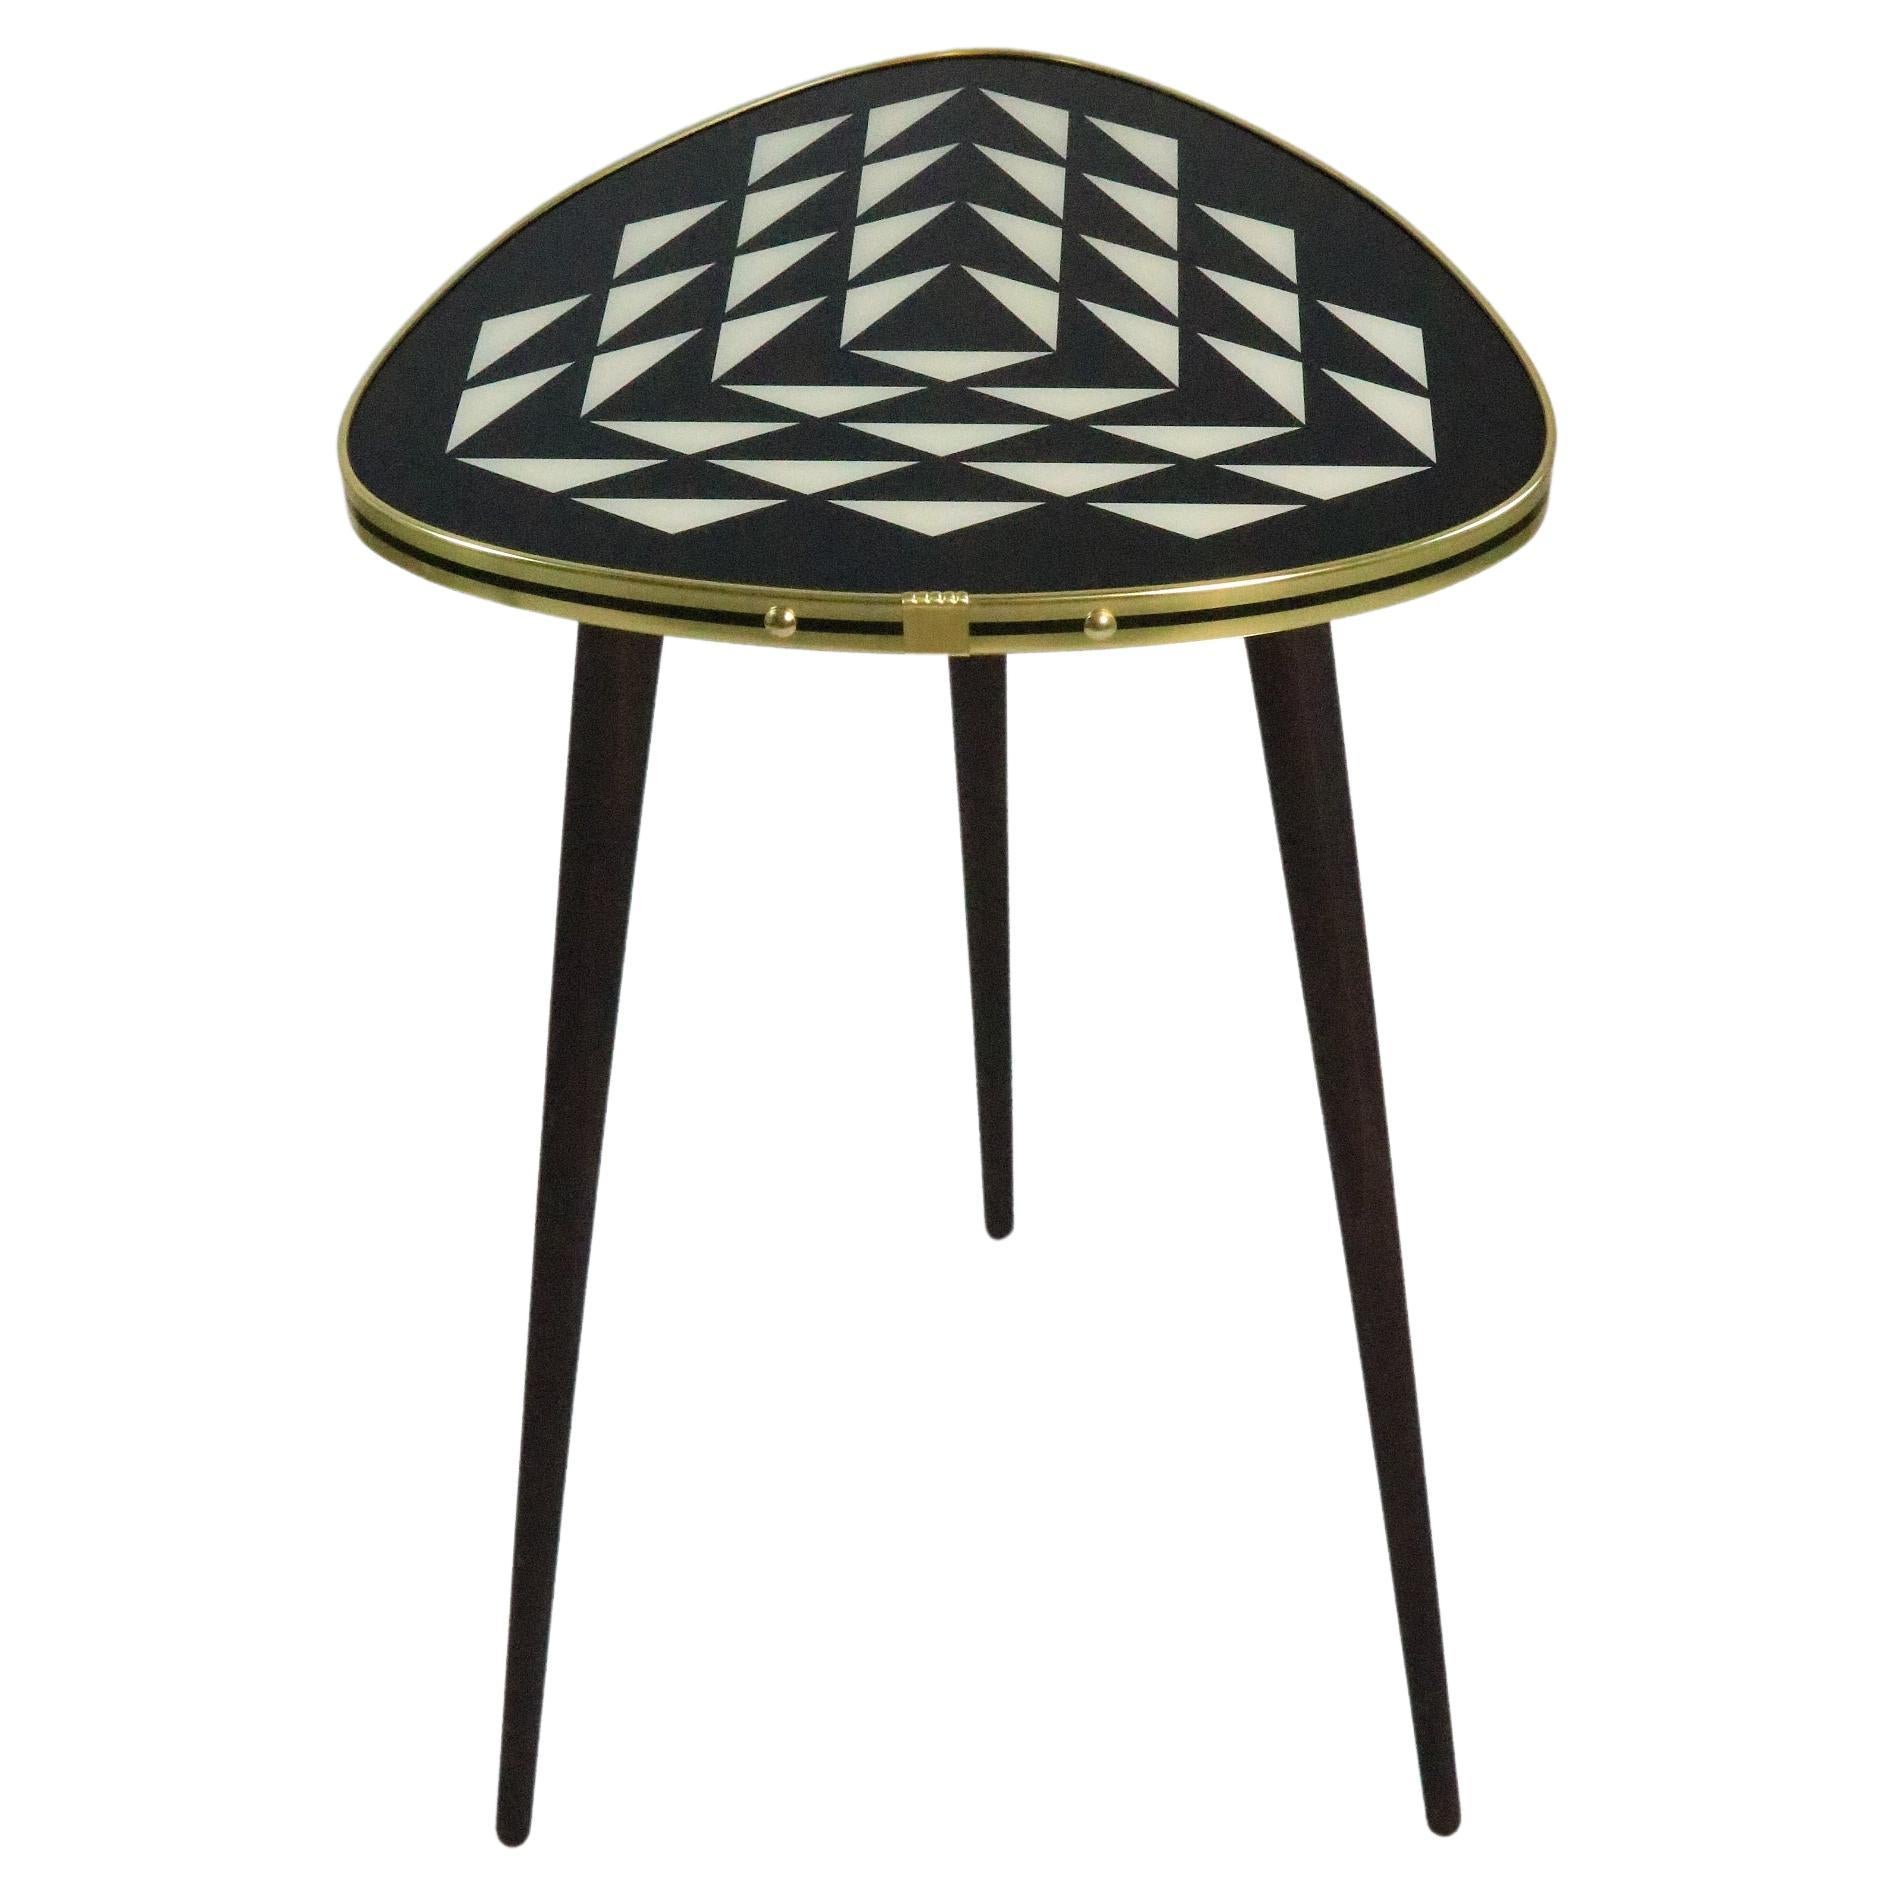 50s Style Side Table, Console, Black / White, 3 Elegant Legs For Sale